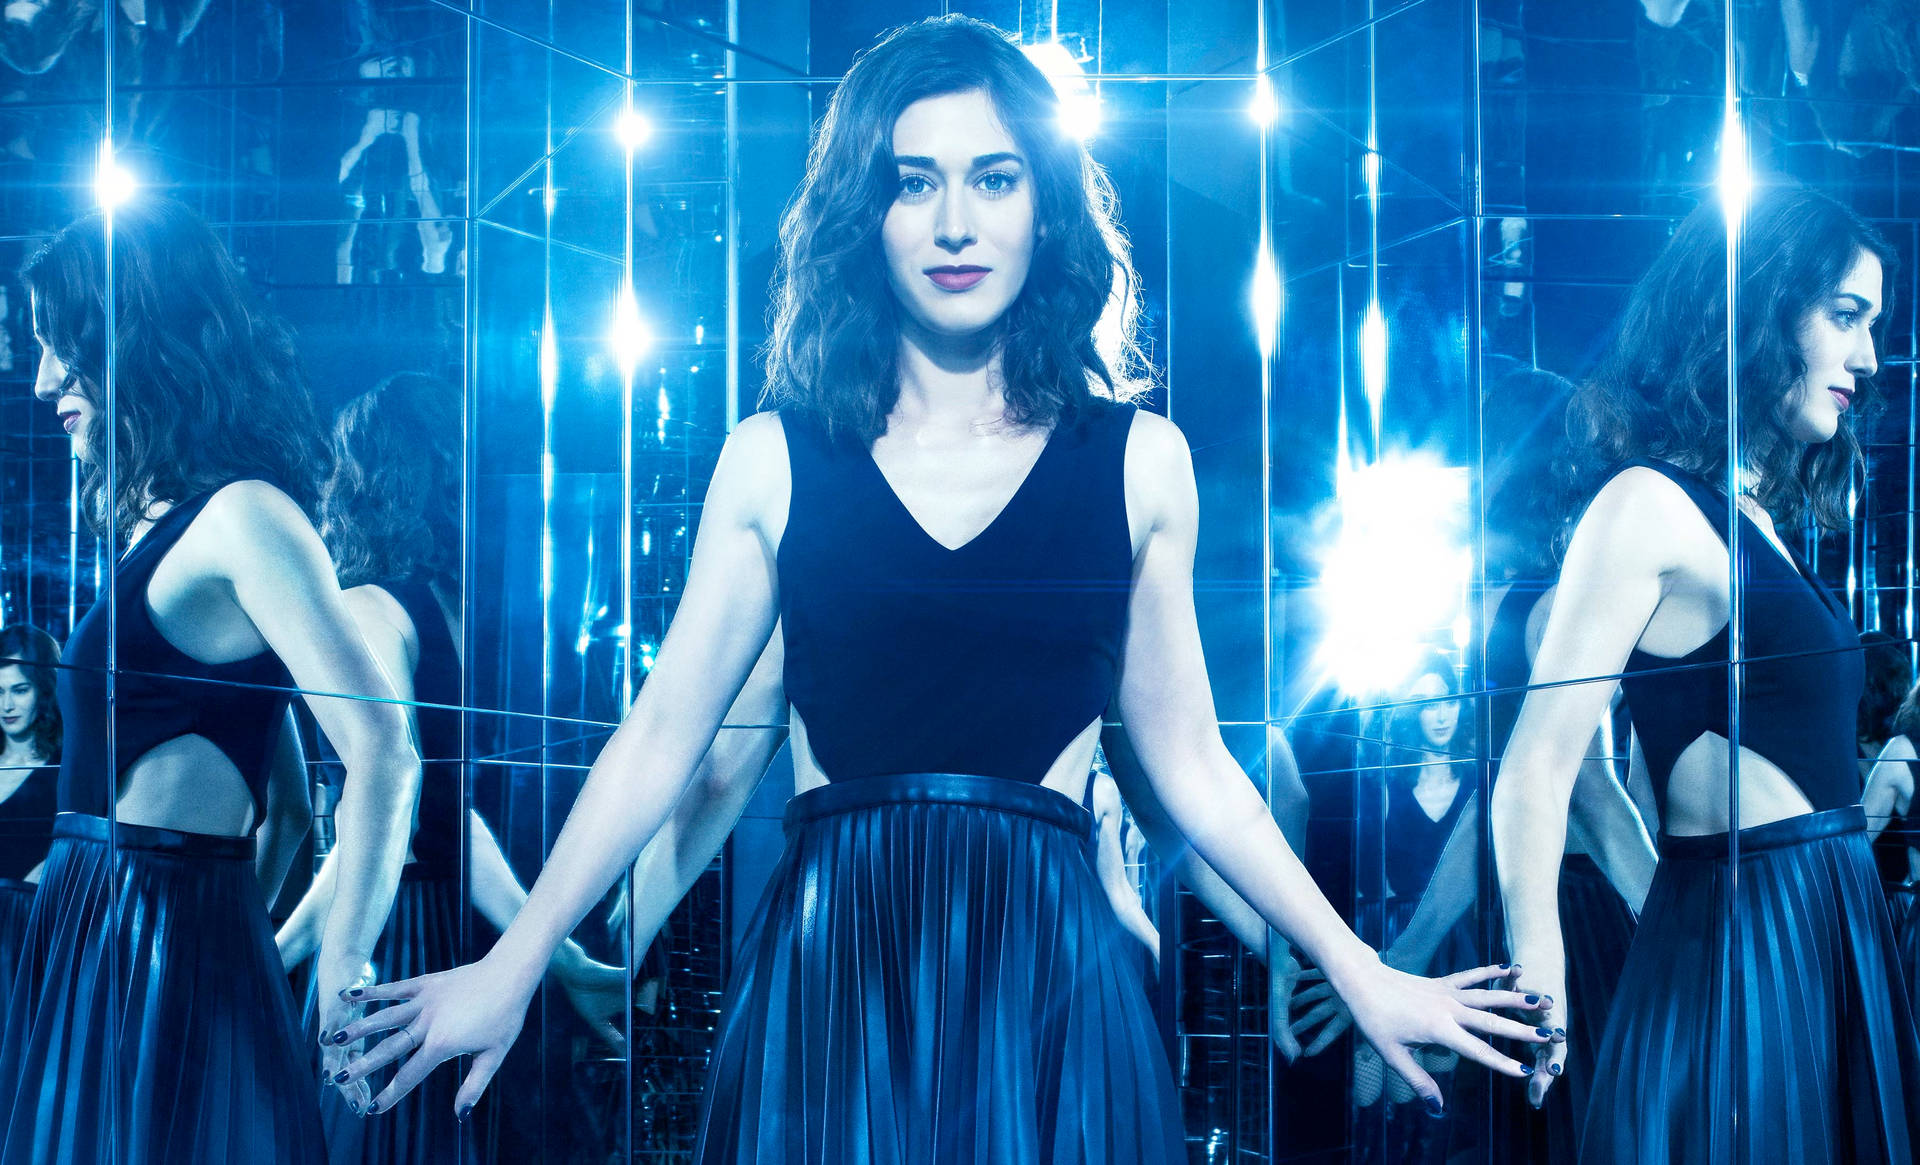 Lizzycaplan I Now You See Me 2. Wallpaper